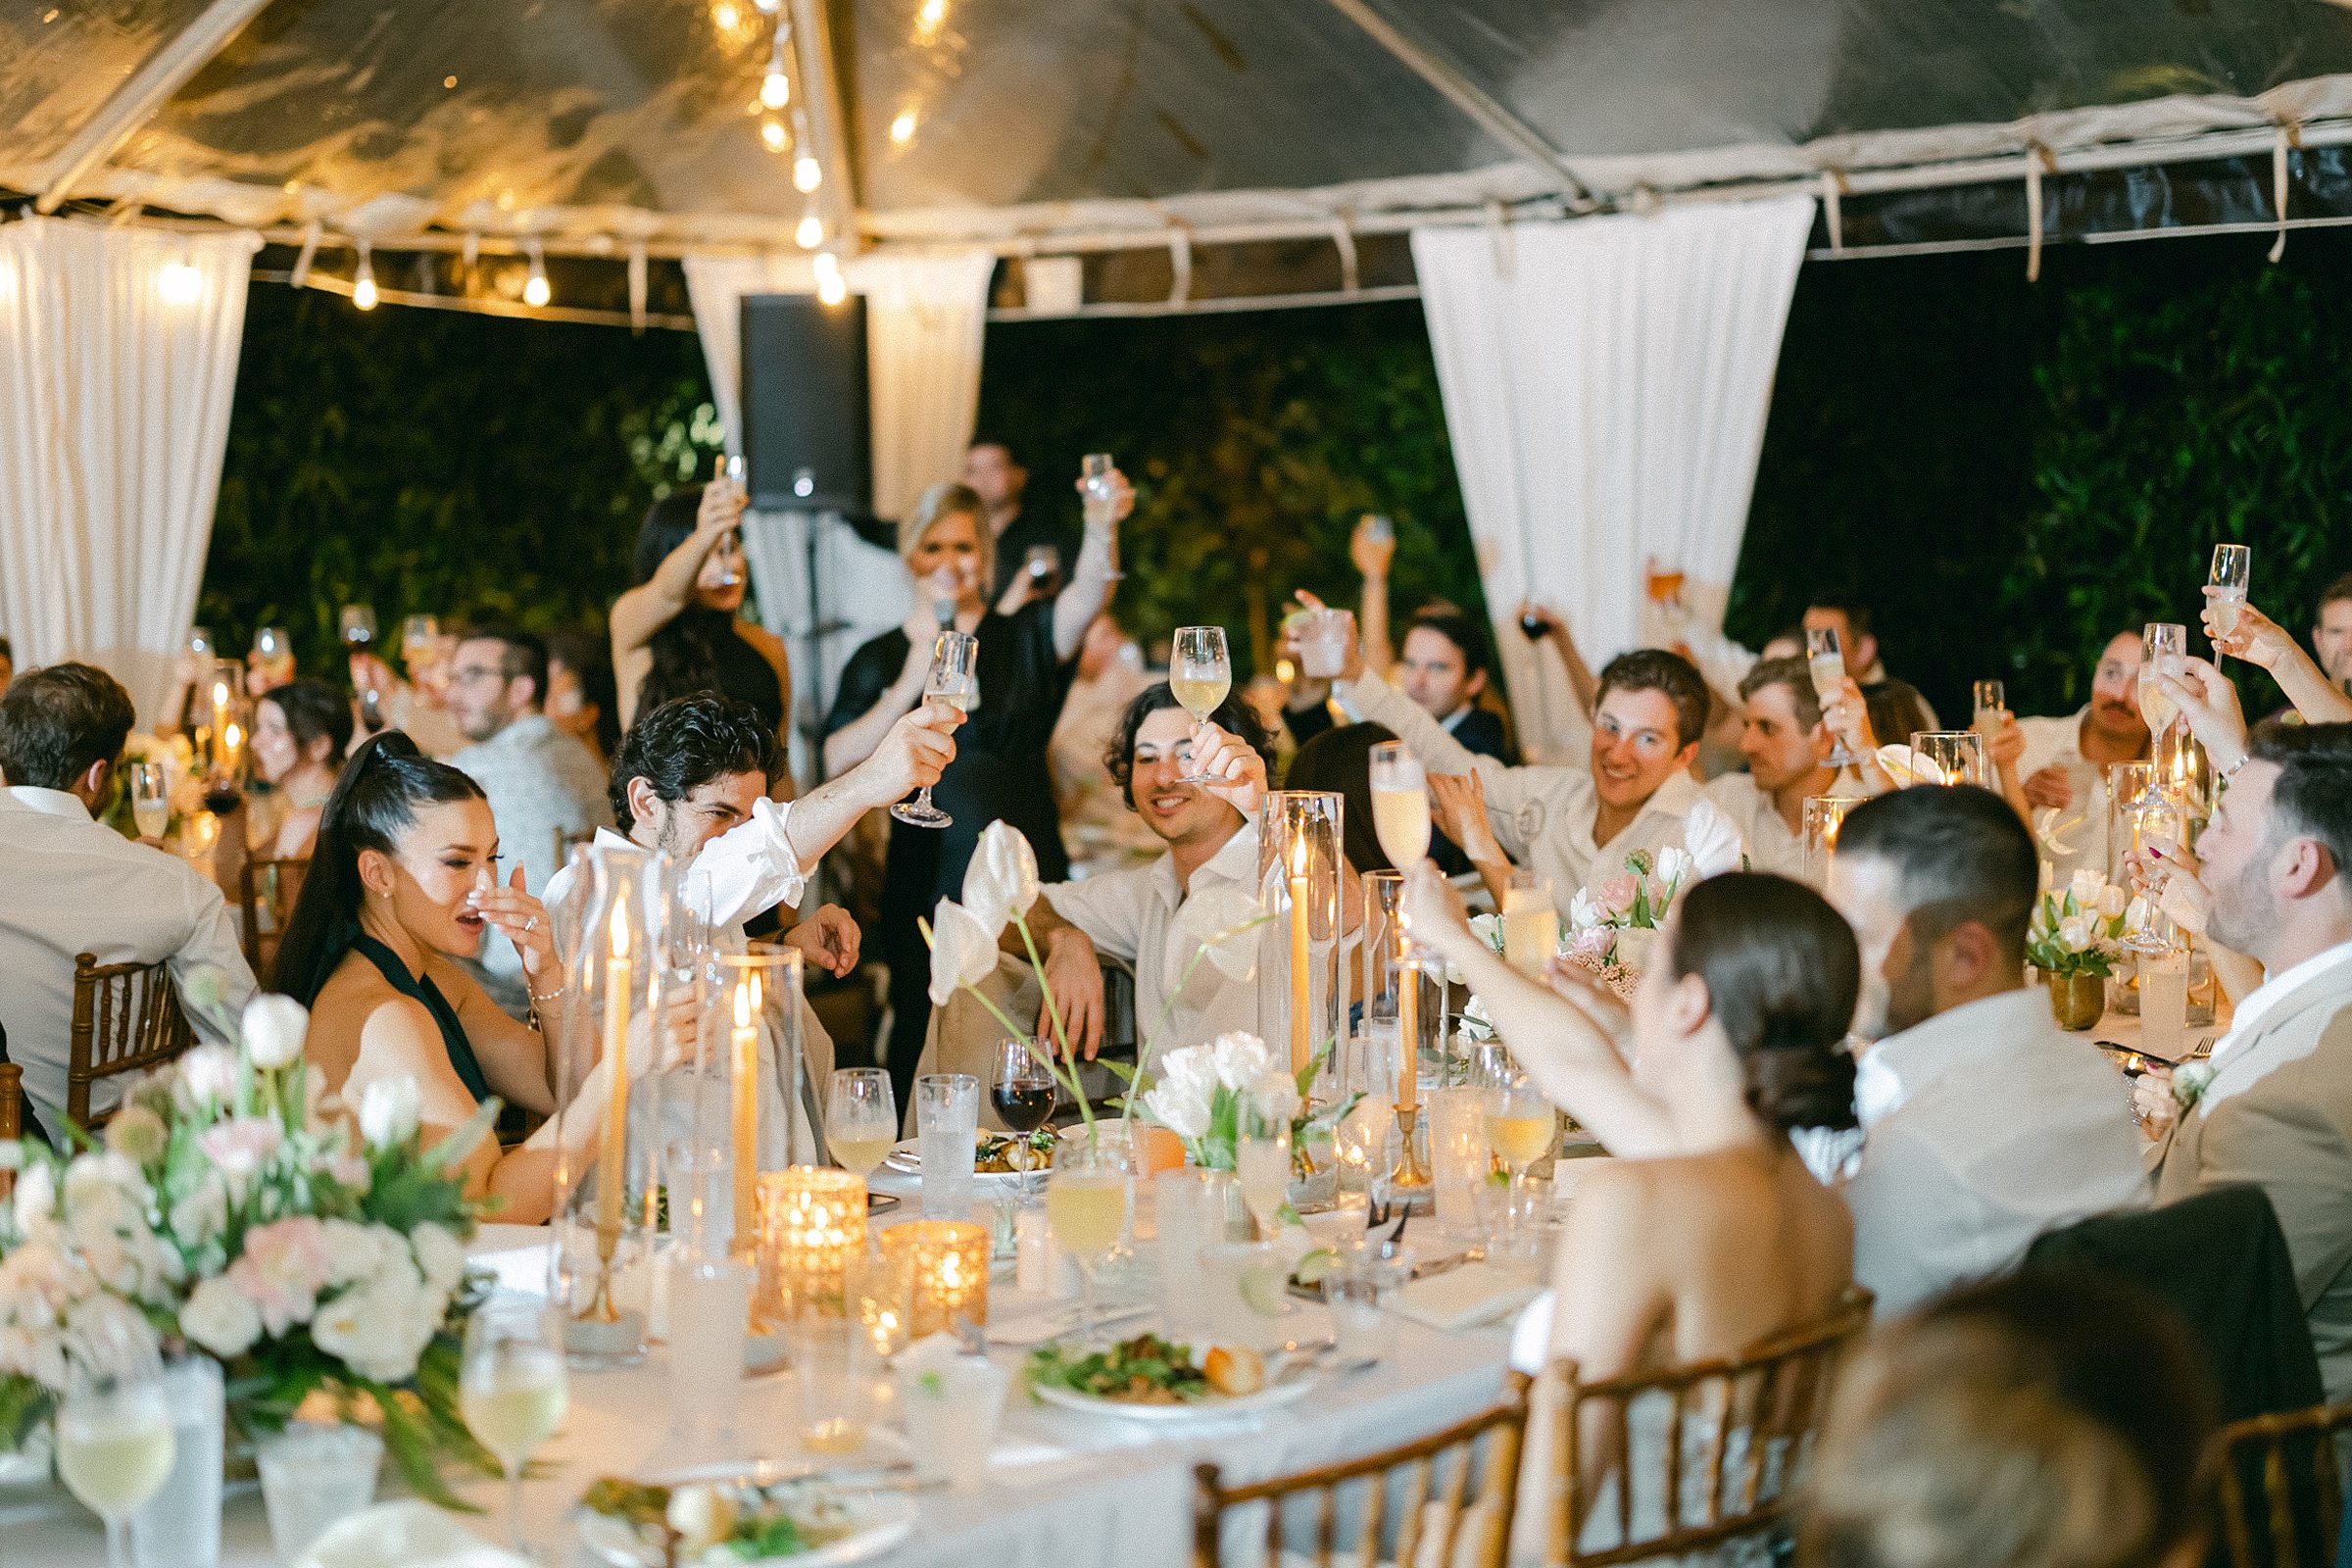 guests raising their glasses in a toast 